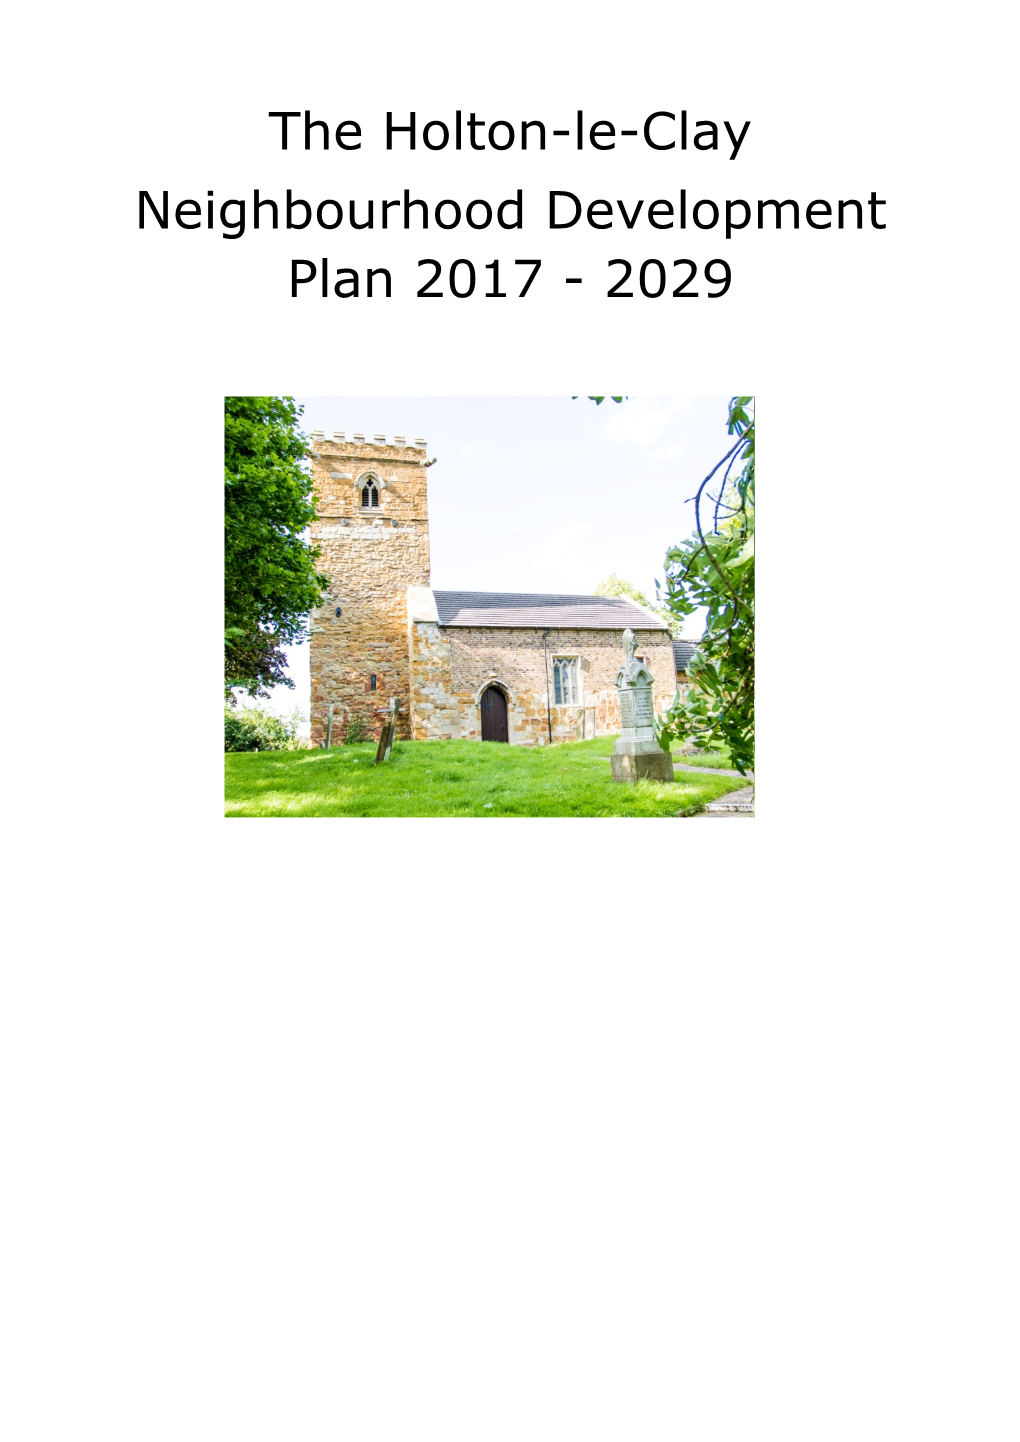 The Holton-Le-Clay Neighbourhood Development Plan 2017 - 2029 Vision, Objectives and Policies